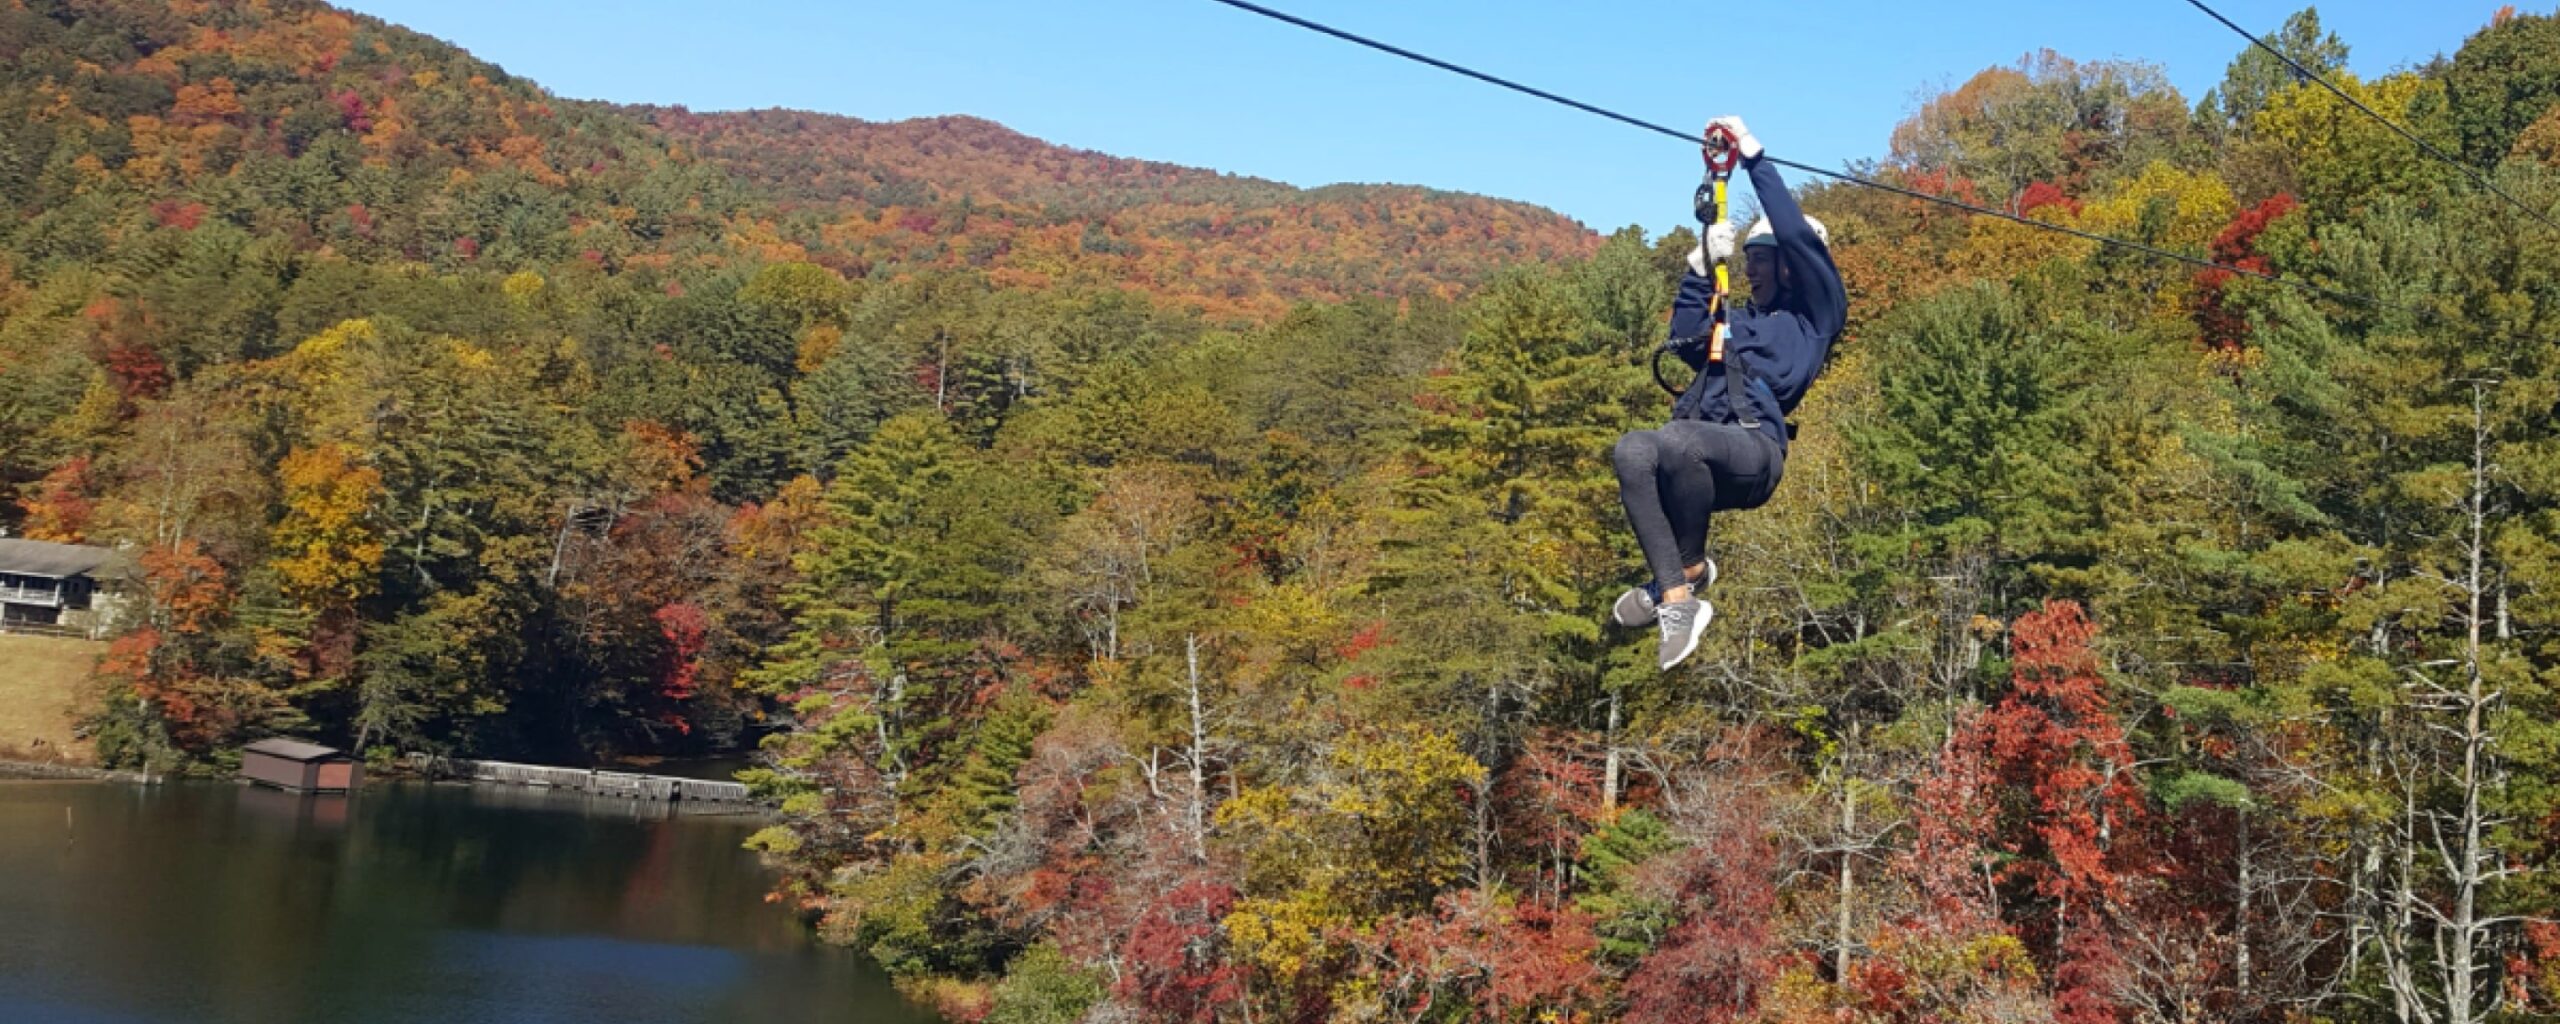 zipline adventure in the fall at unicoi state park